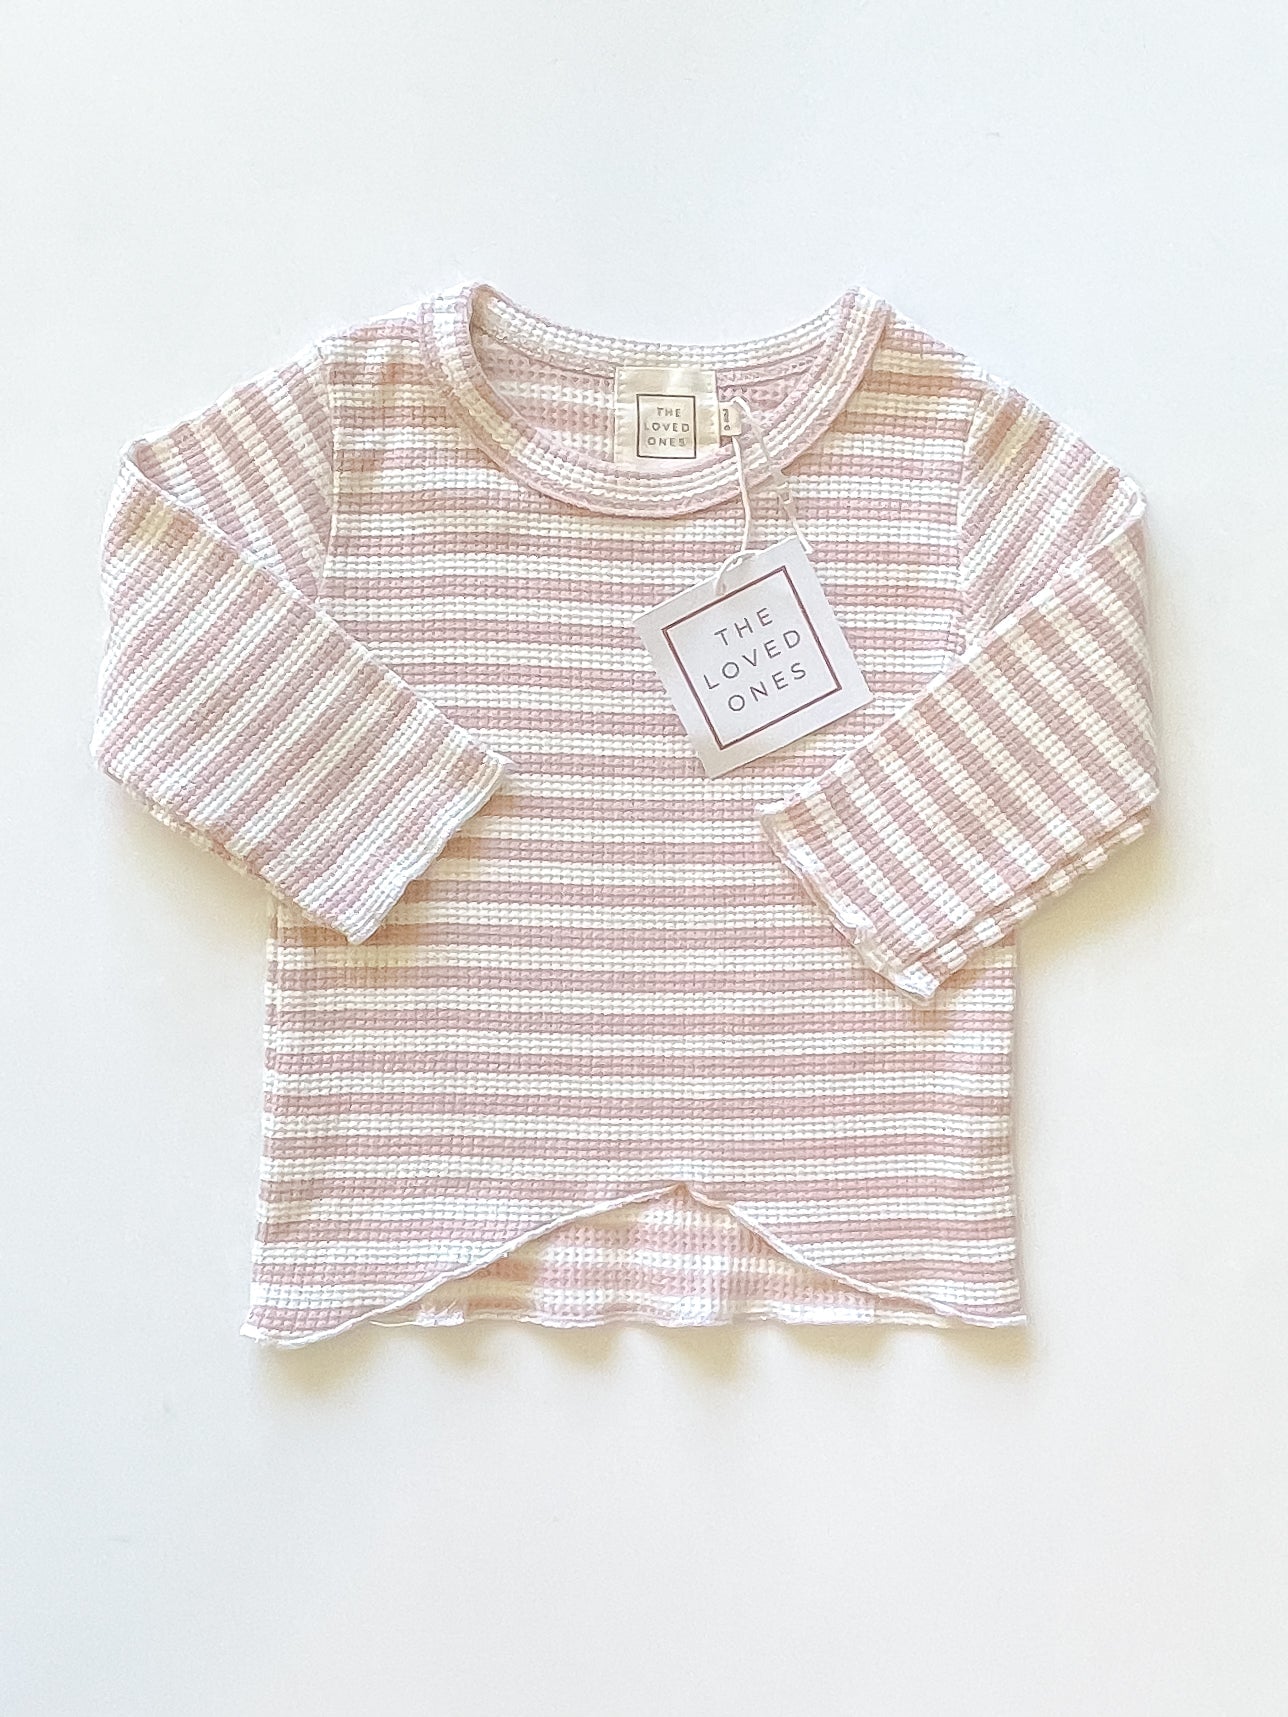 BNWT The Loved Ones waffle striped tee (3-6m)